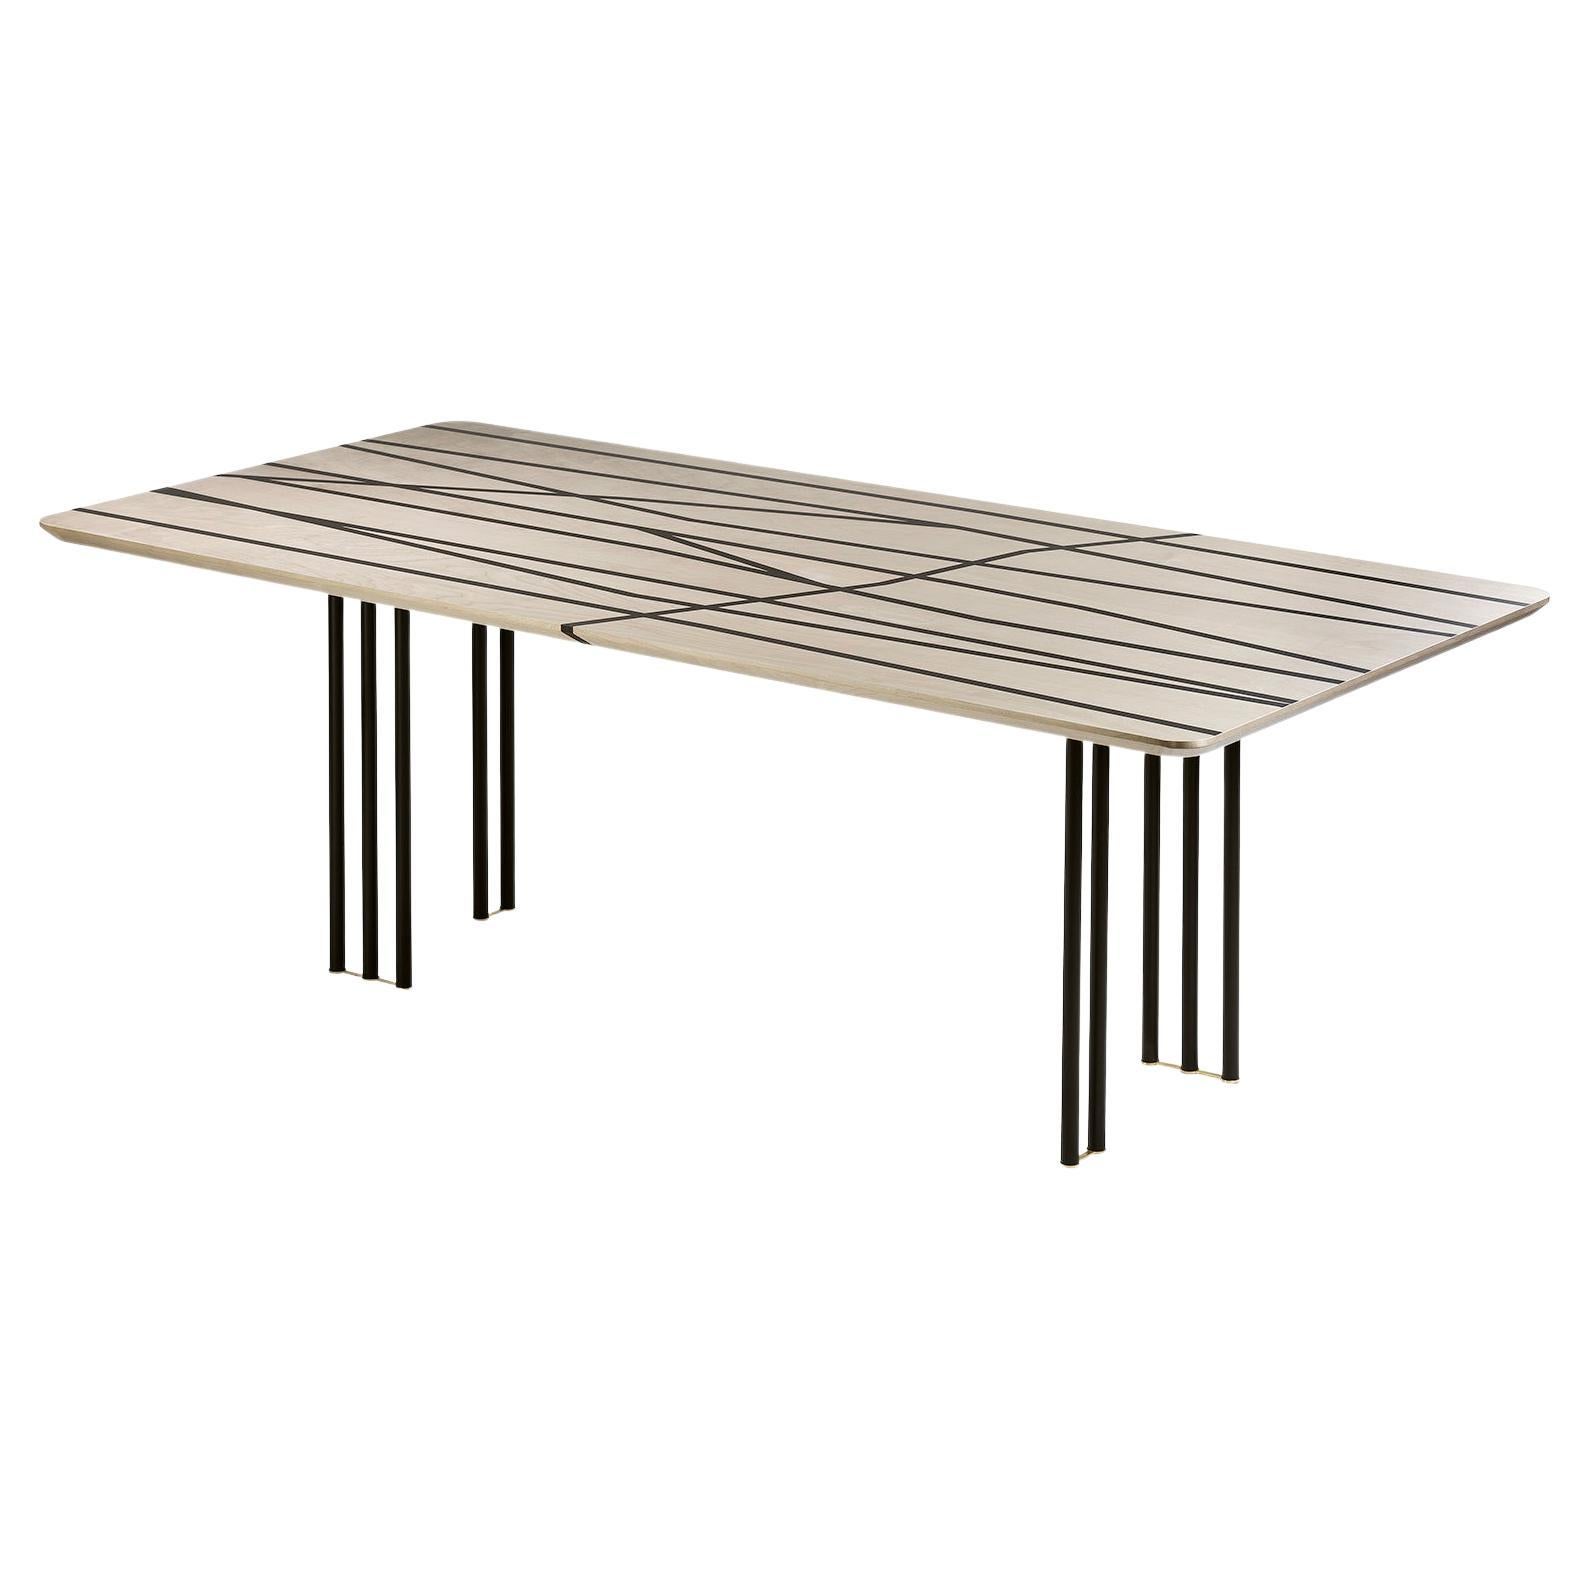 21st Century Foresta Inlaid Table in Birch, Black Ash, Metal Legs, Made in Italy For Sale